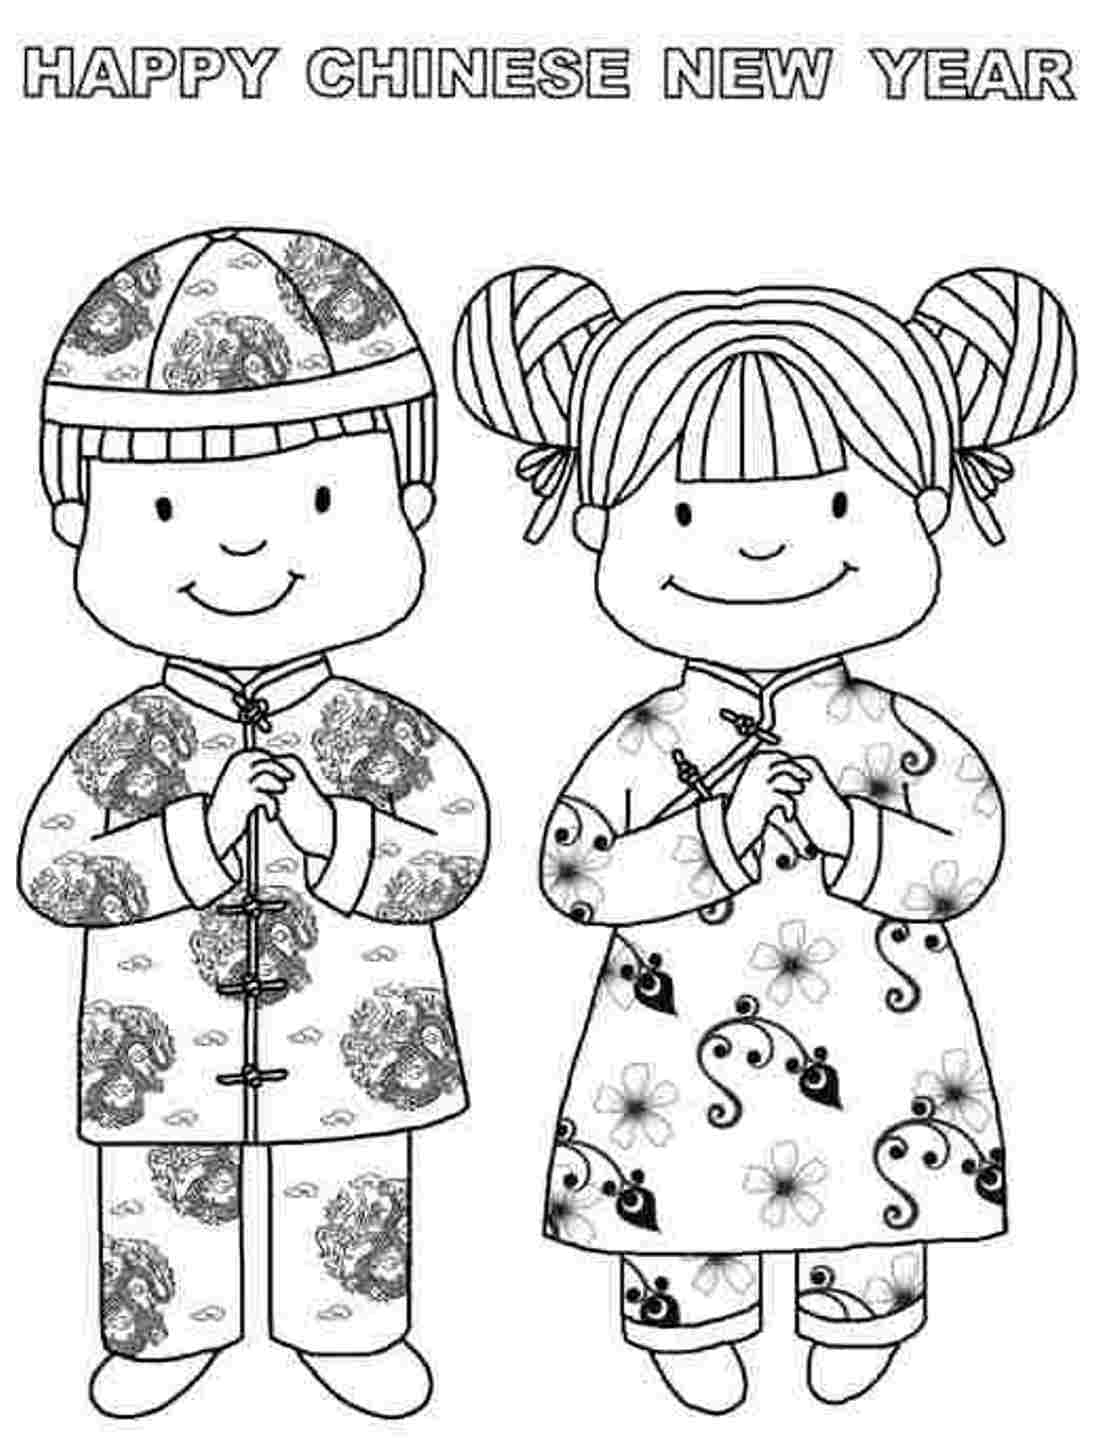  collection of new. Chinese clipart black and white